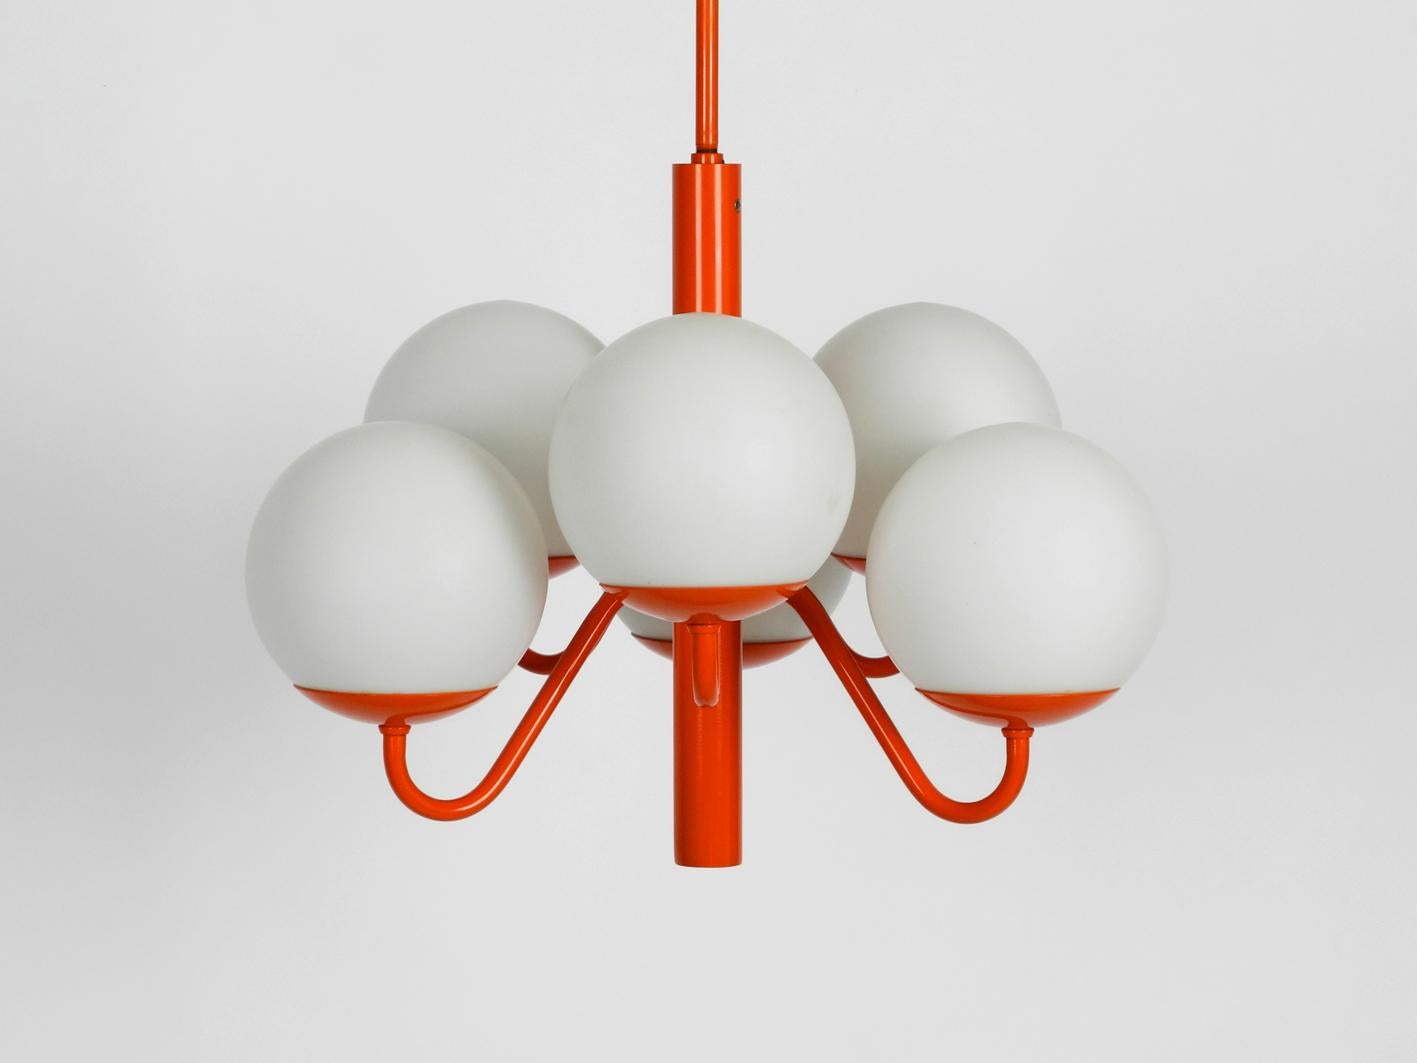 Rare Kaiser Leuchten metal ceiling lamp with six opal glasses.
Beautiful 1960s Space Age Pop Art design in orange.
Very good vintage condition with no damages. Original coating very well preserved. 100% original condition and fully